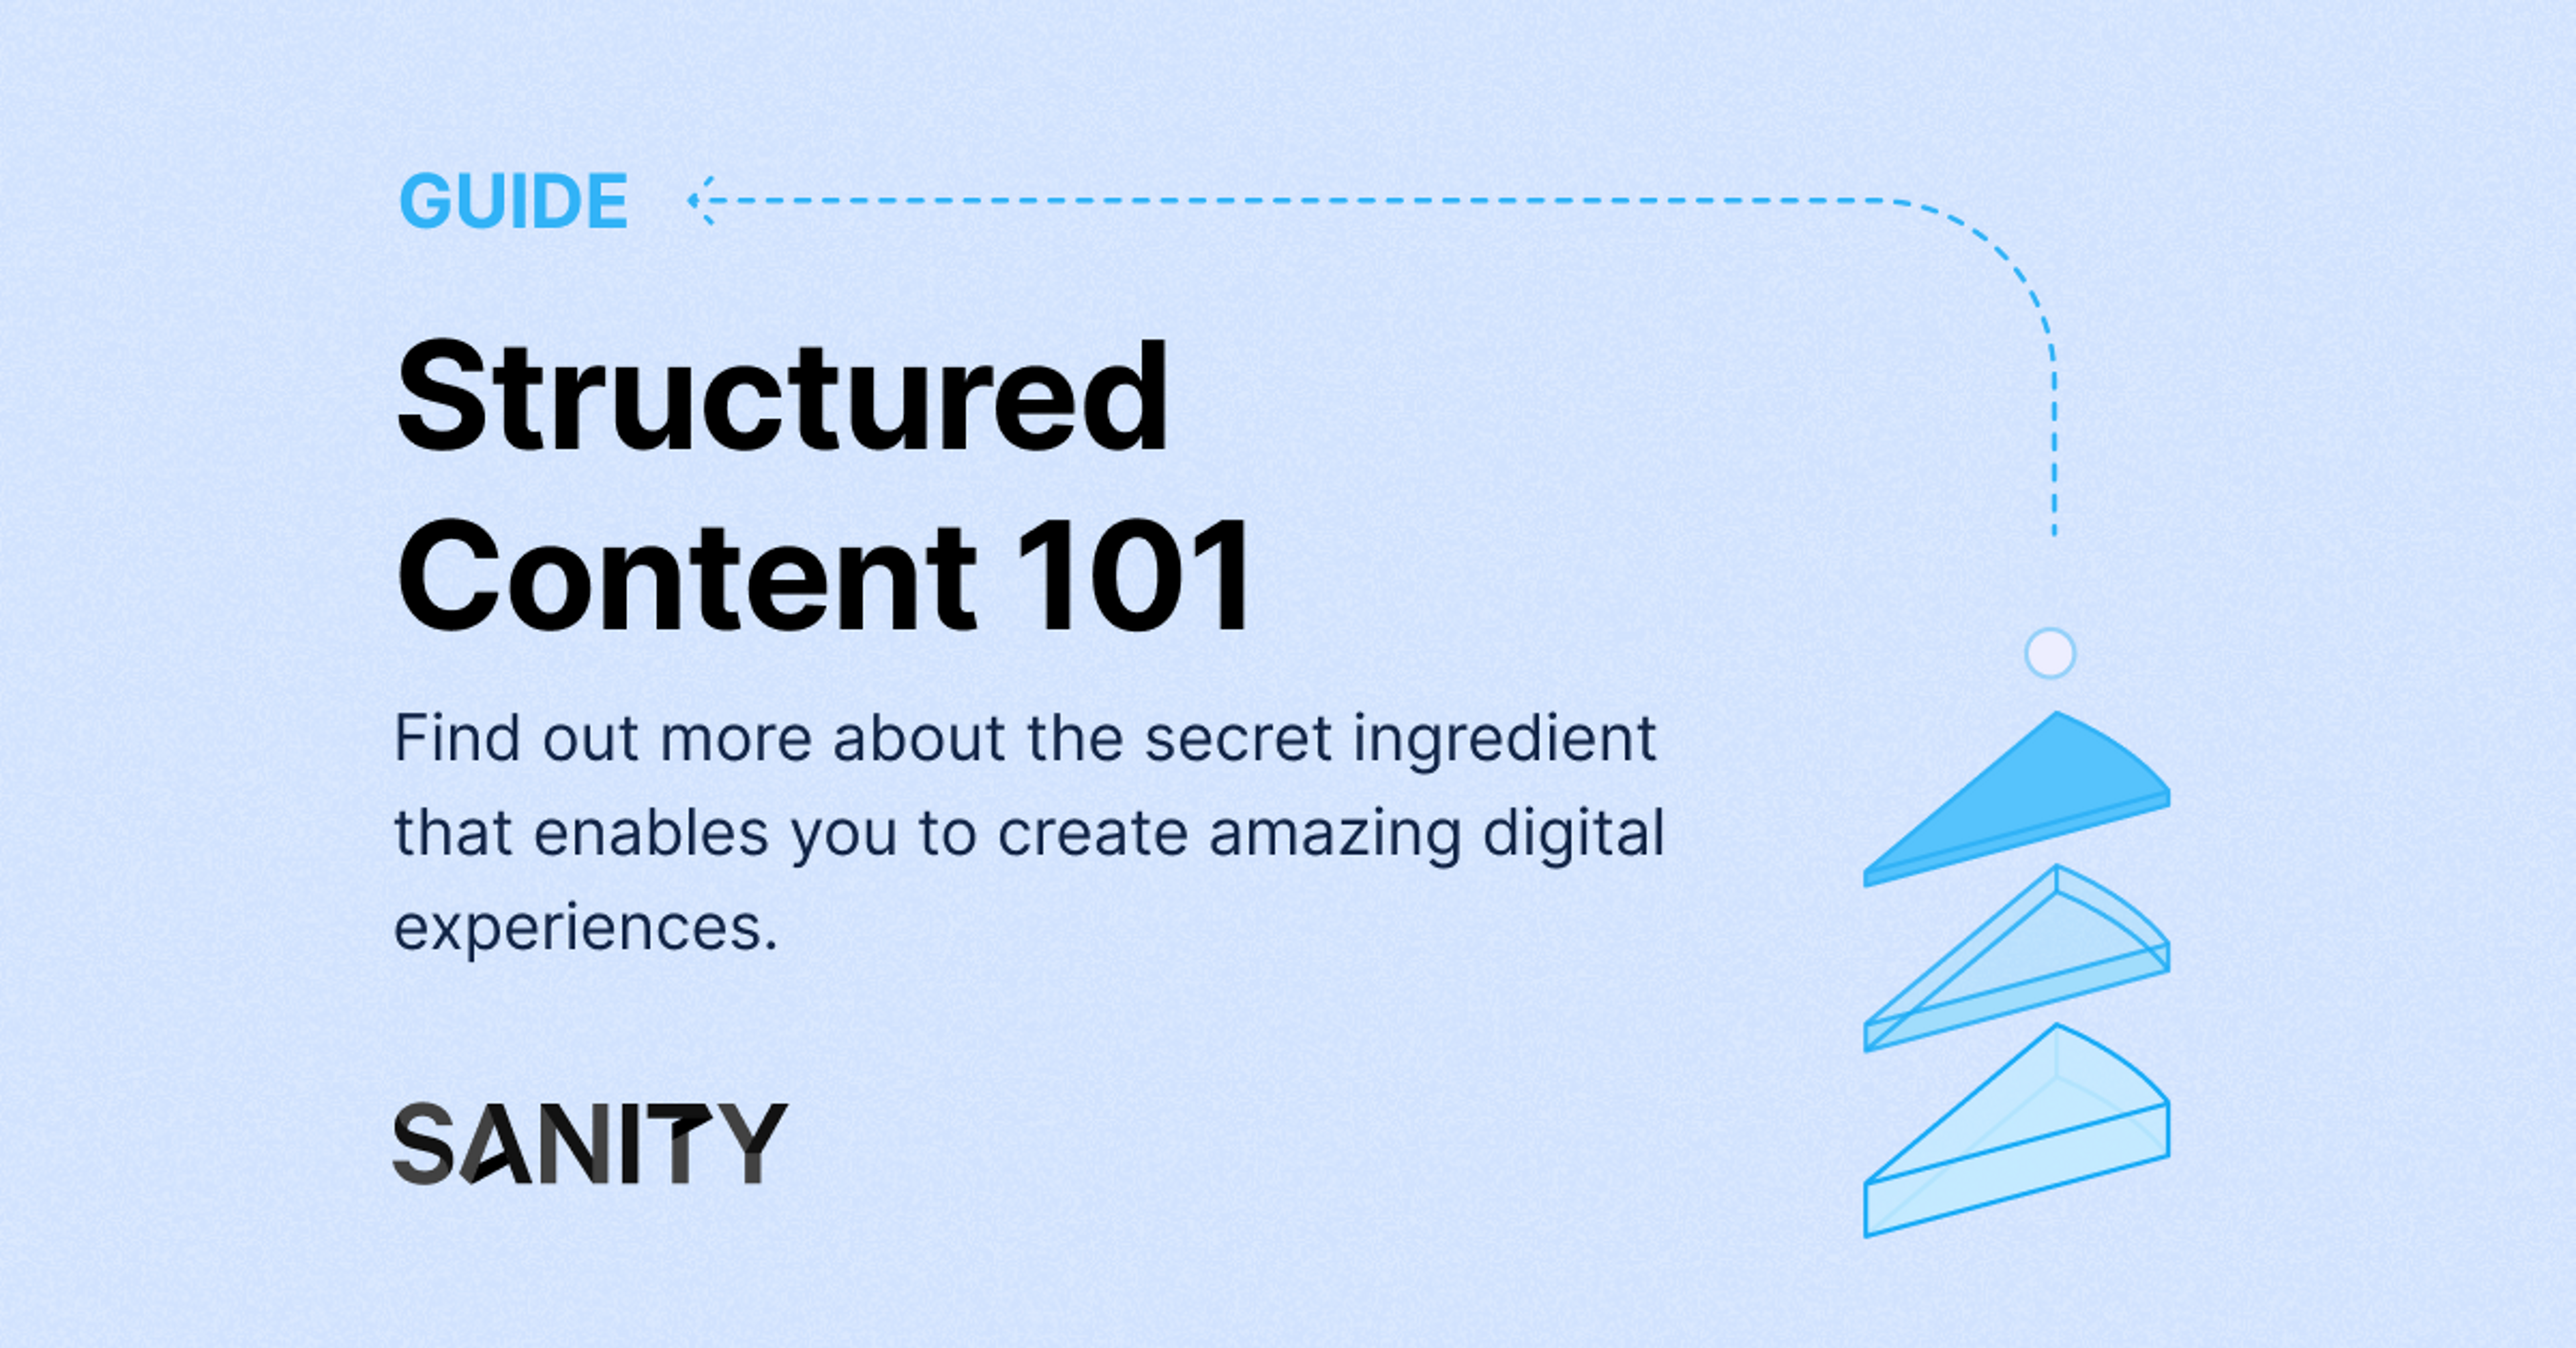 Guide to Structured Content